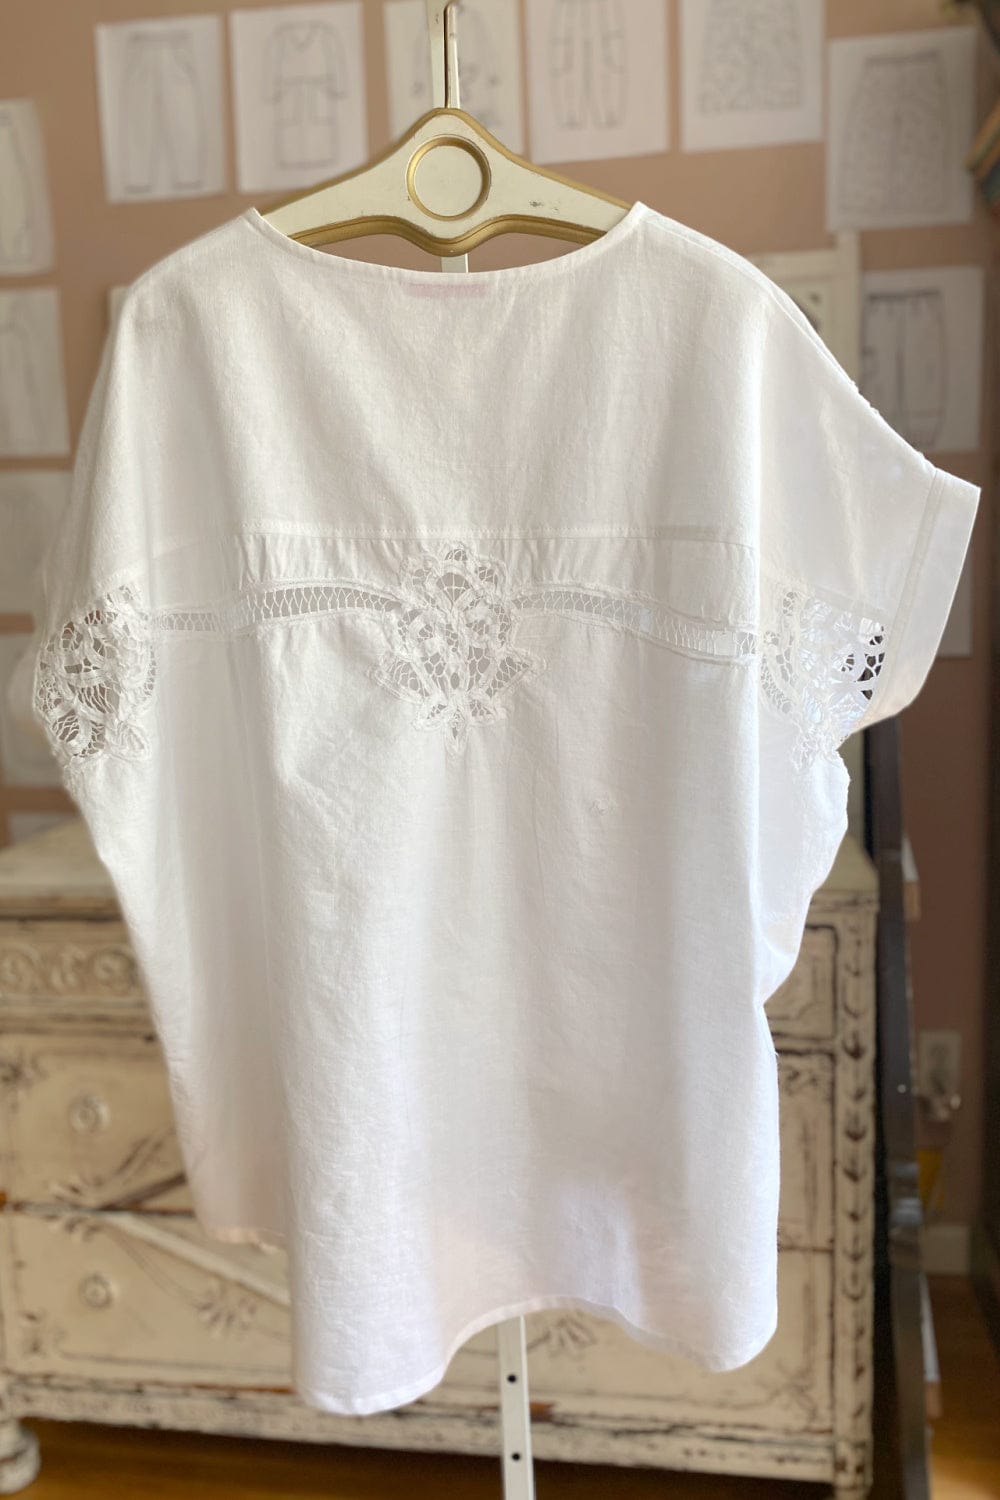 Back view of a women's white cotton shortsleeve top with decorative stitching.